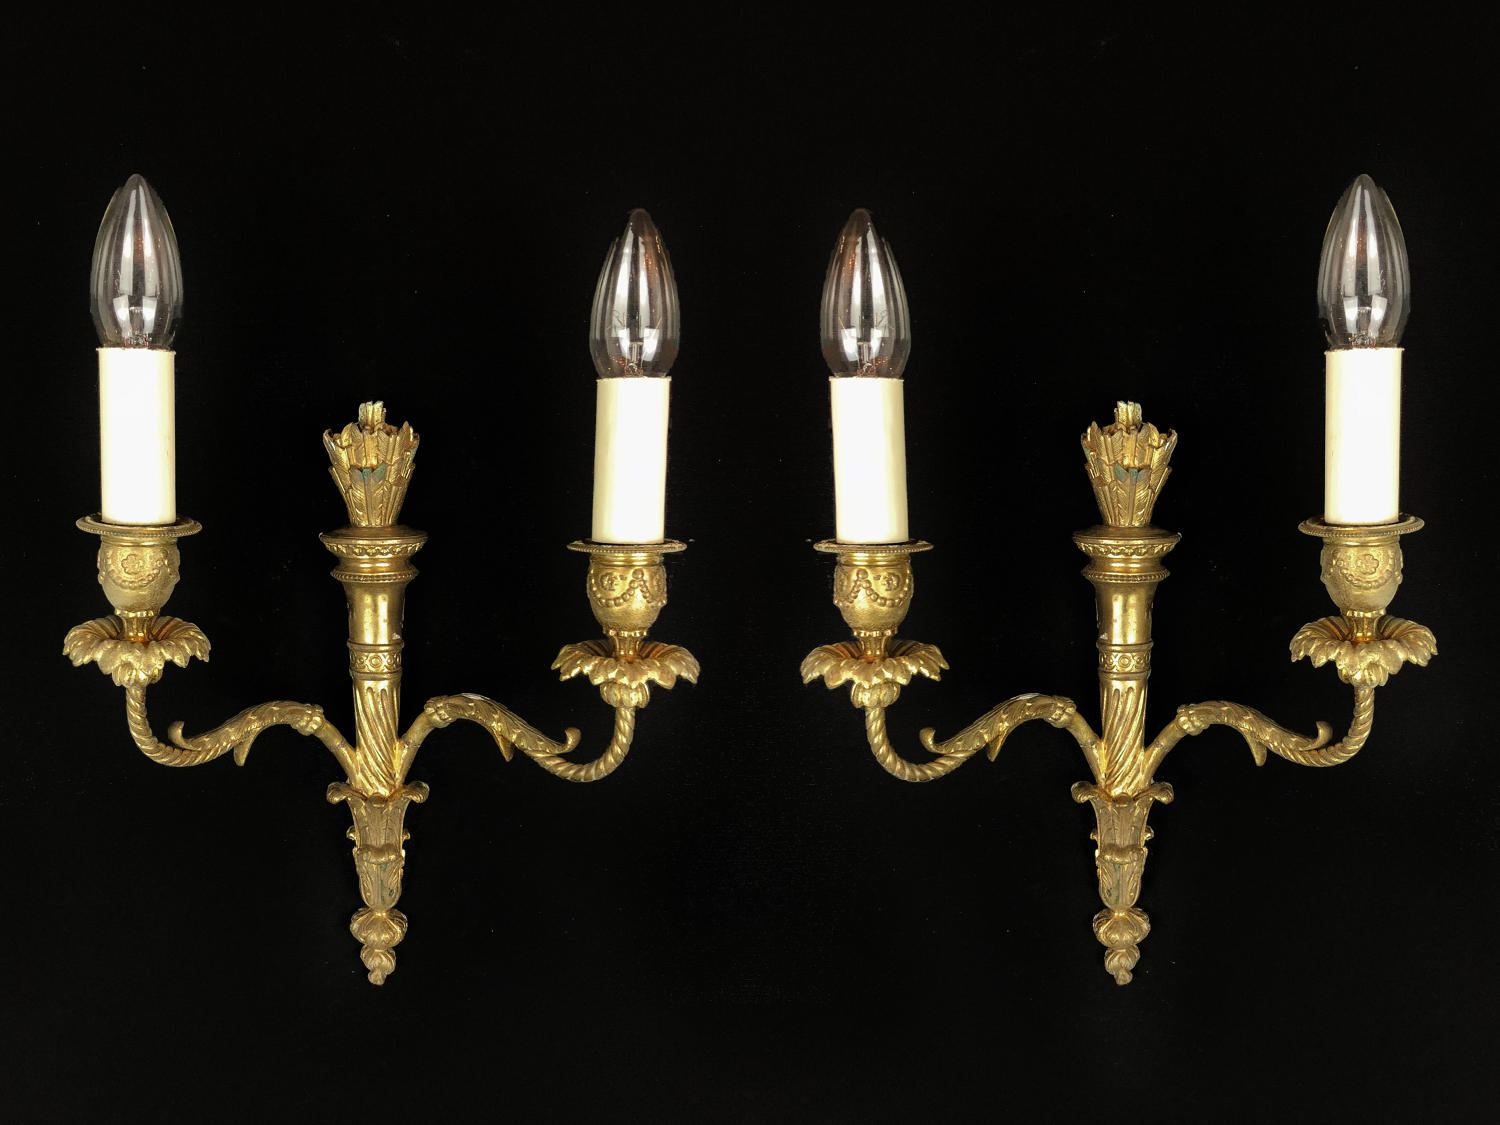 A set of 3 Louis XVI style wall lights